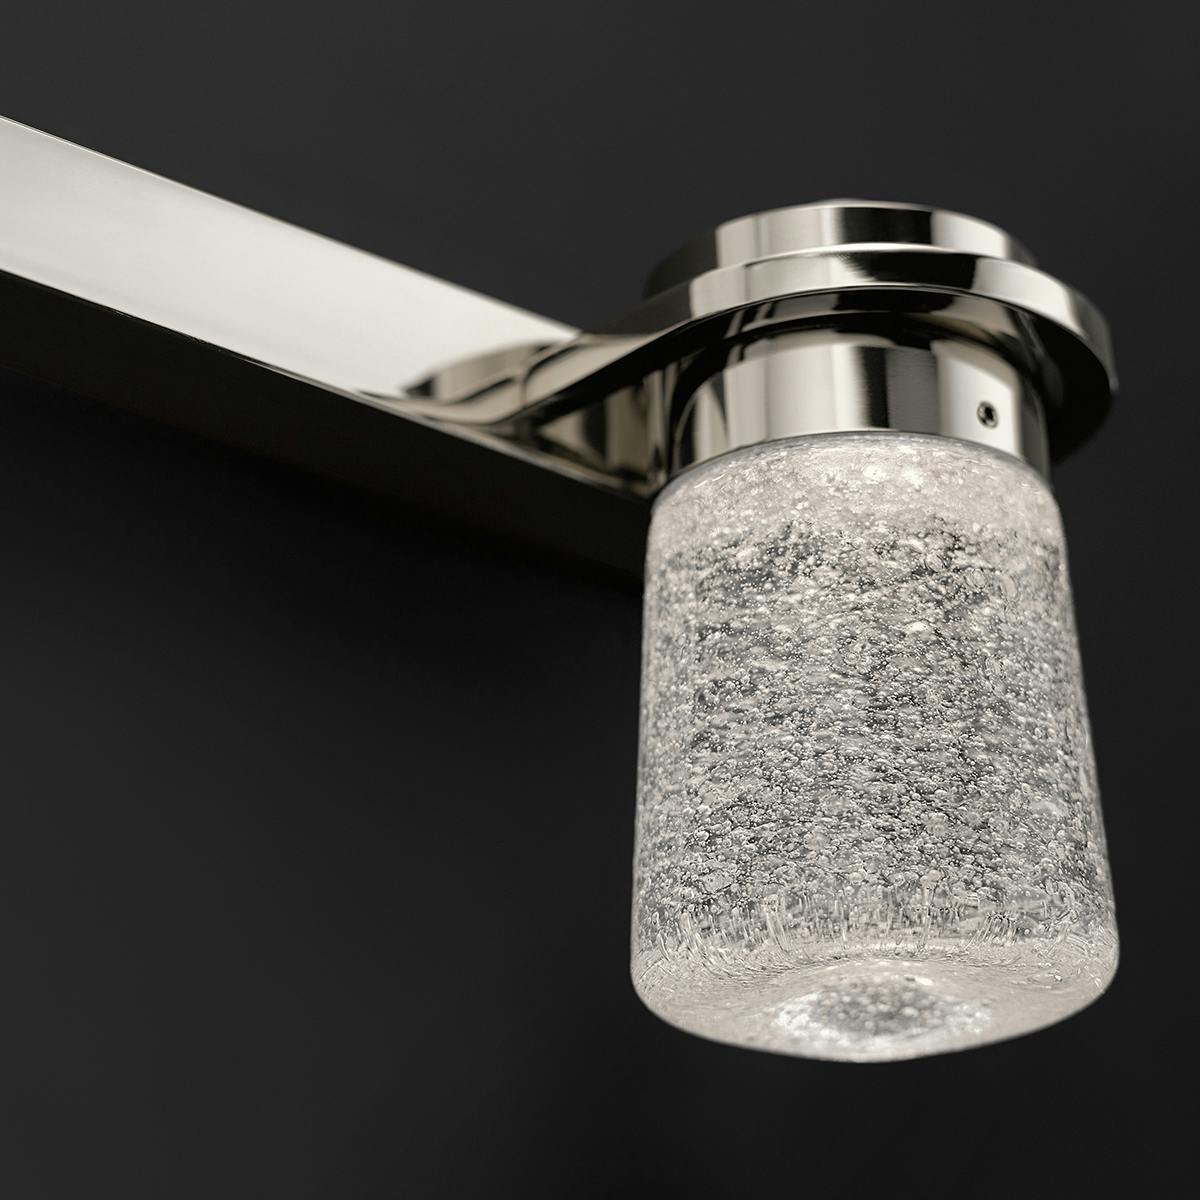 Close up view of the Vada 3000K 4 Light Vanity Light Nickel on a white background